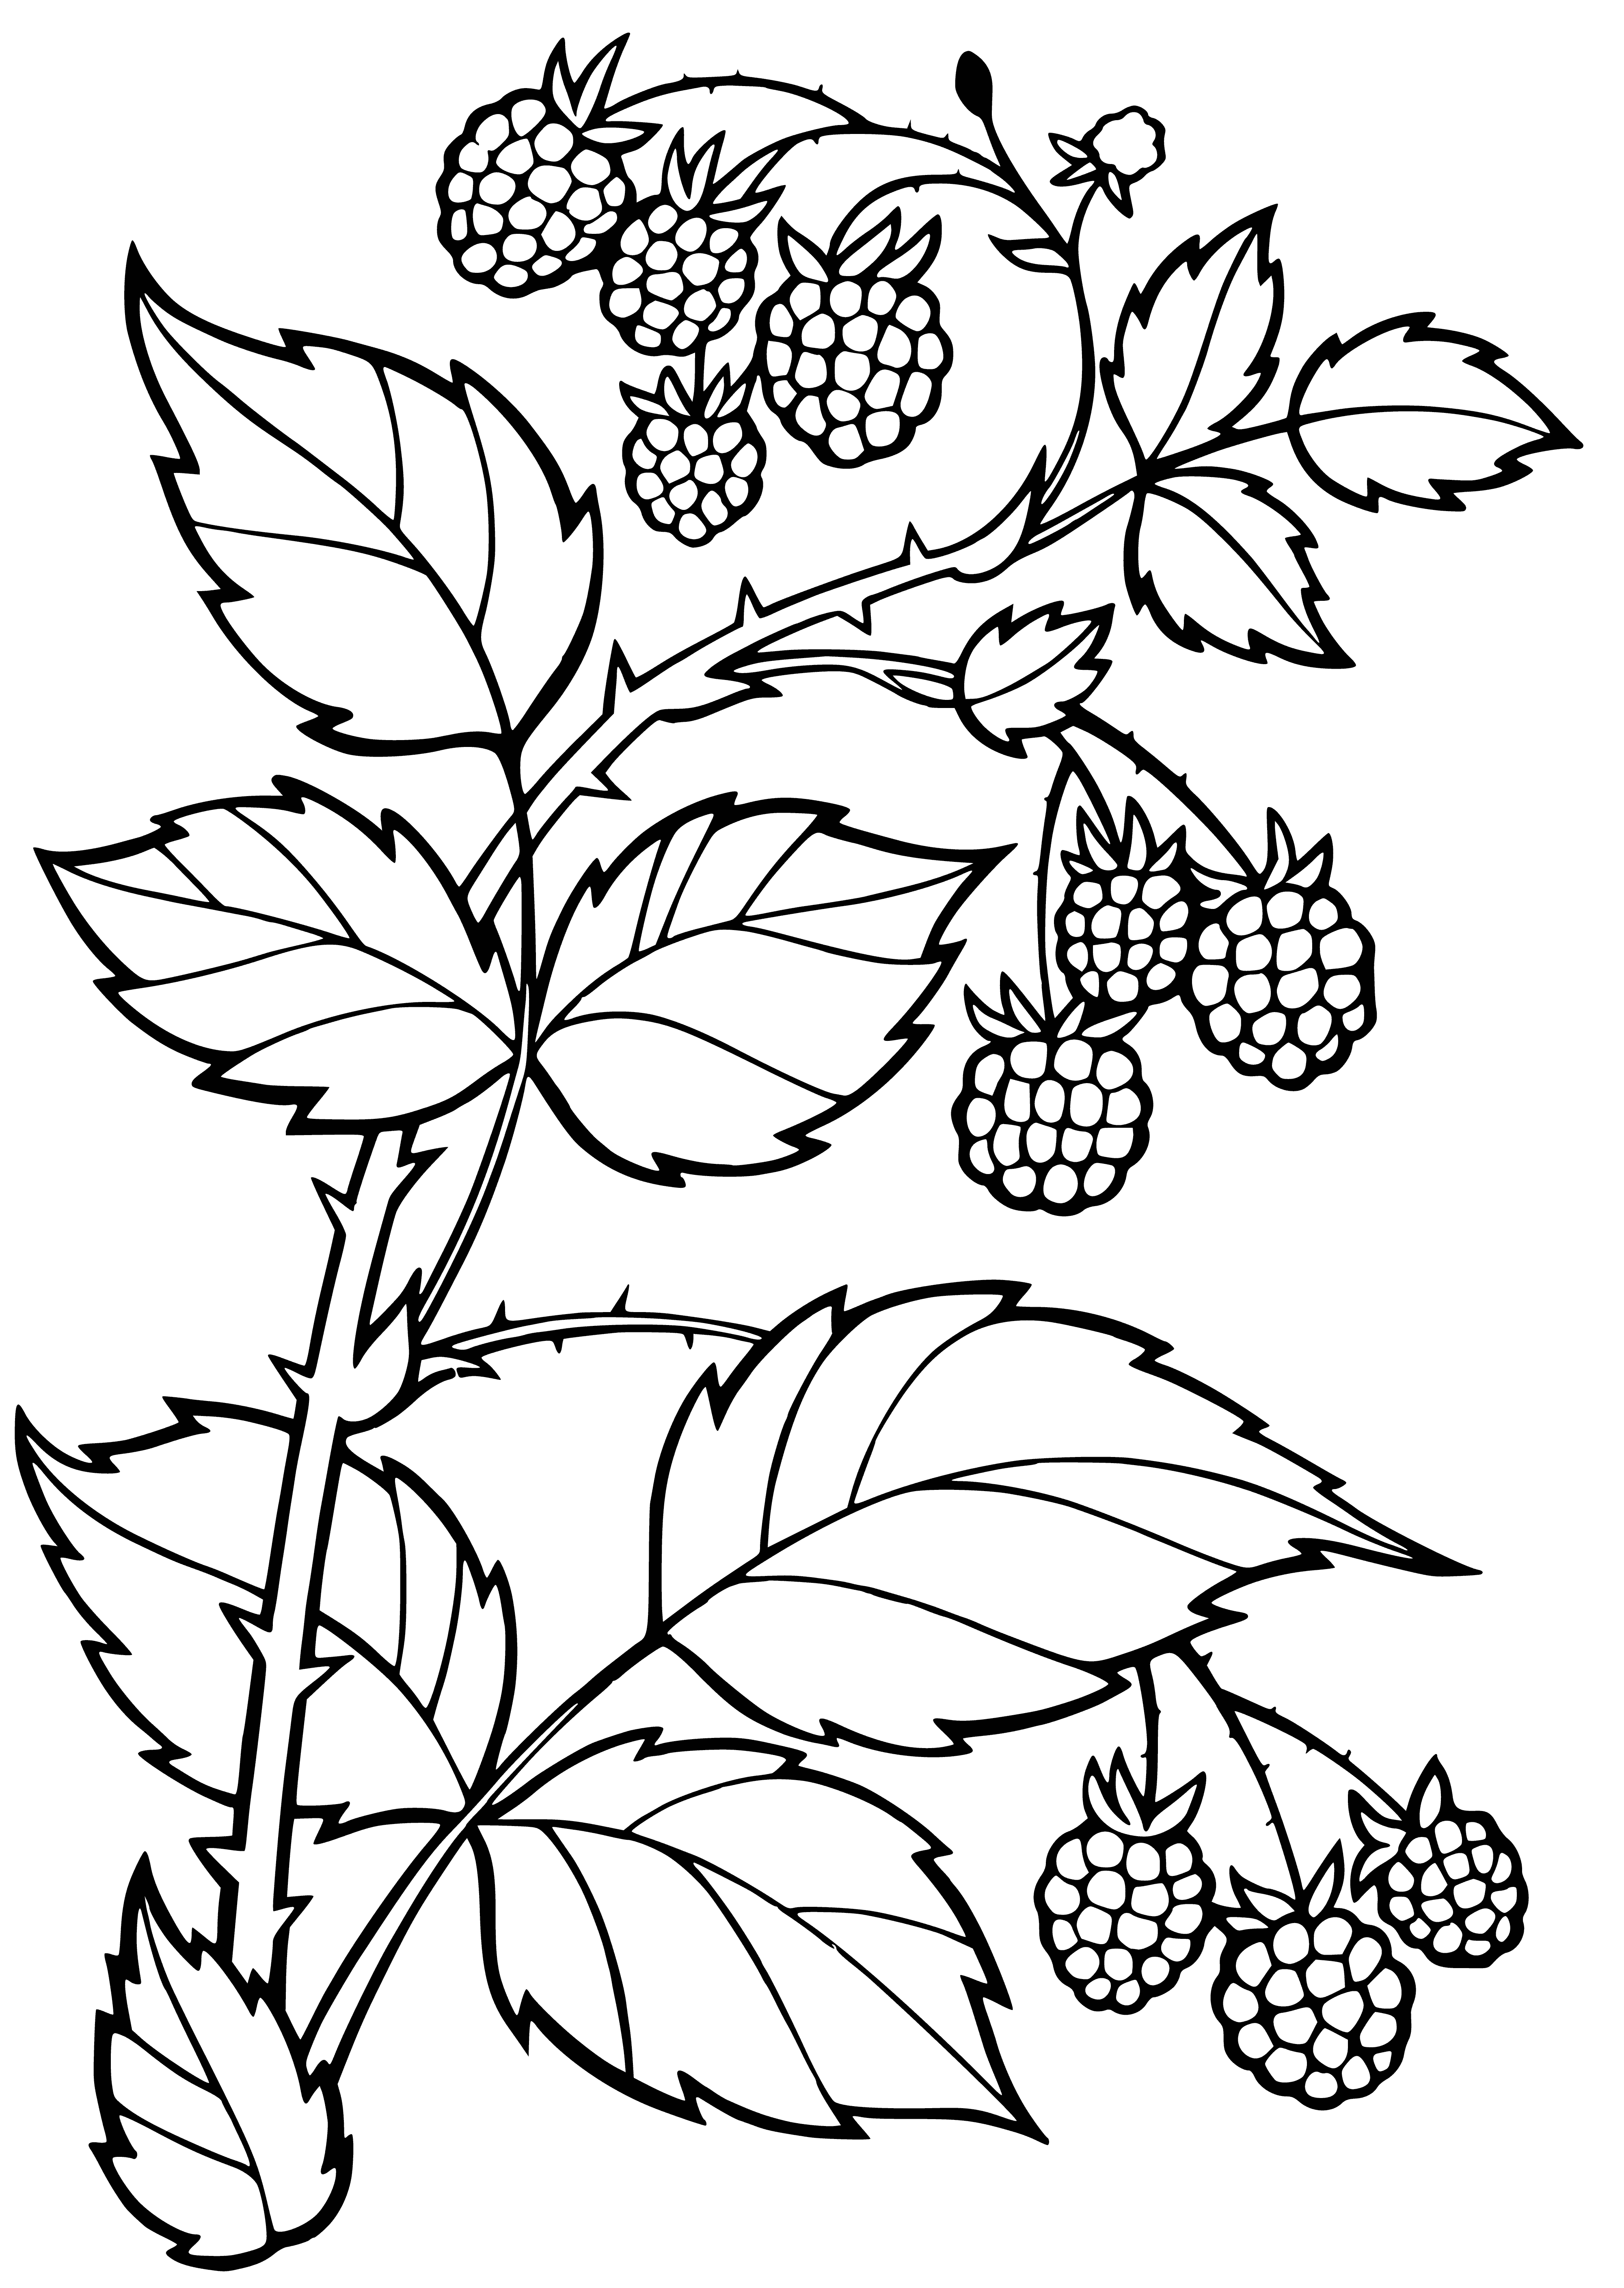 Raspberry branch coloring page